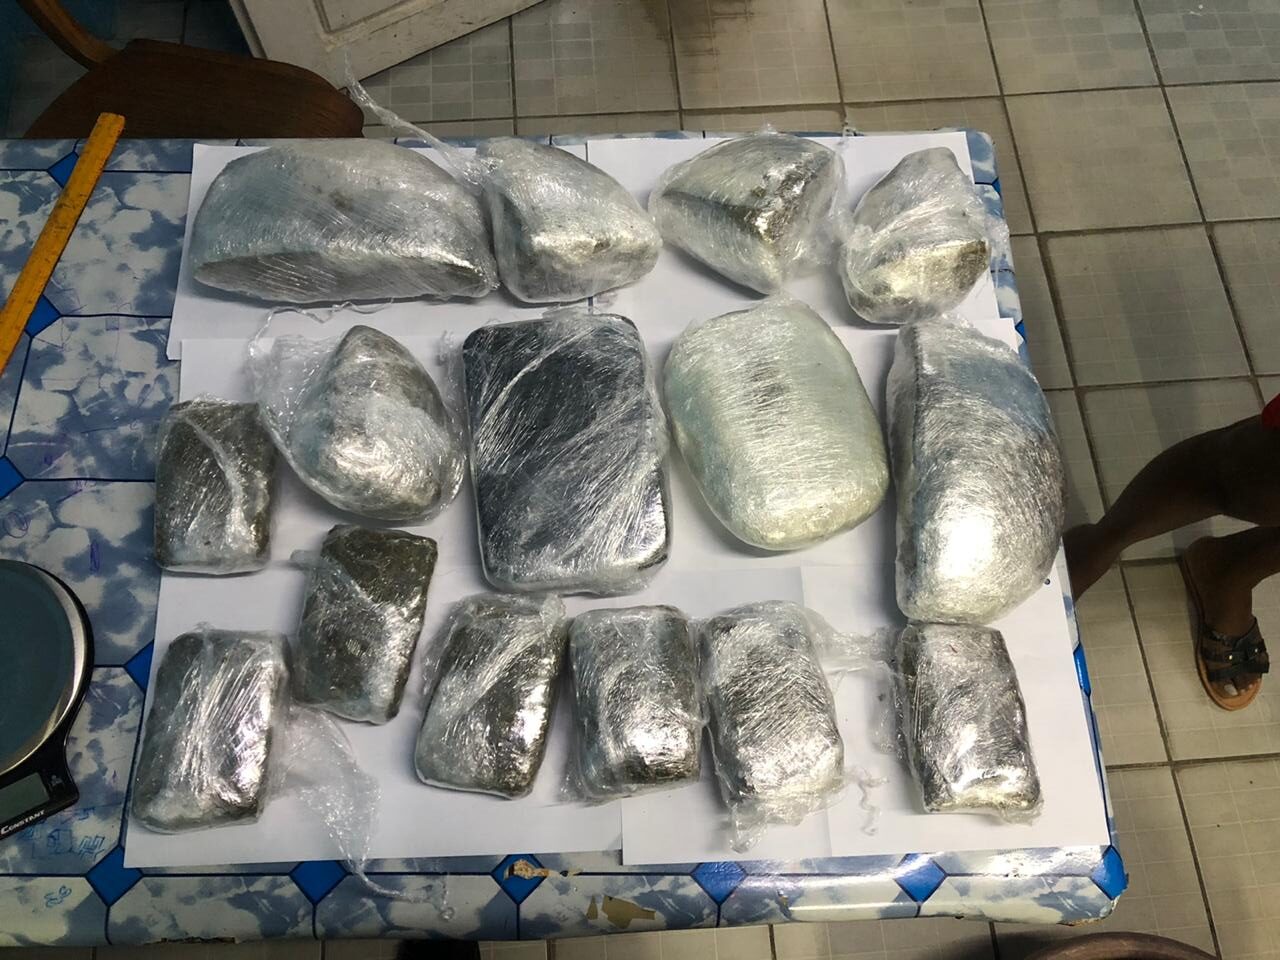 The 11.325 lbs of cannabis found at the West Ruimveldt house